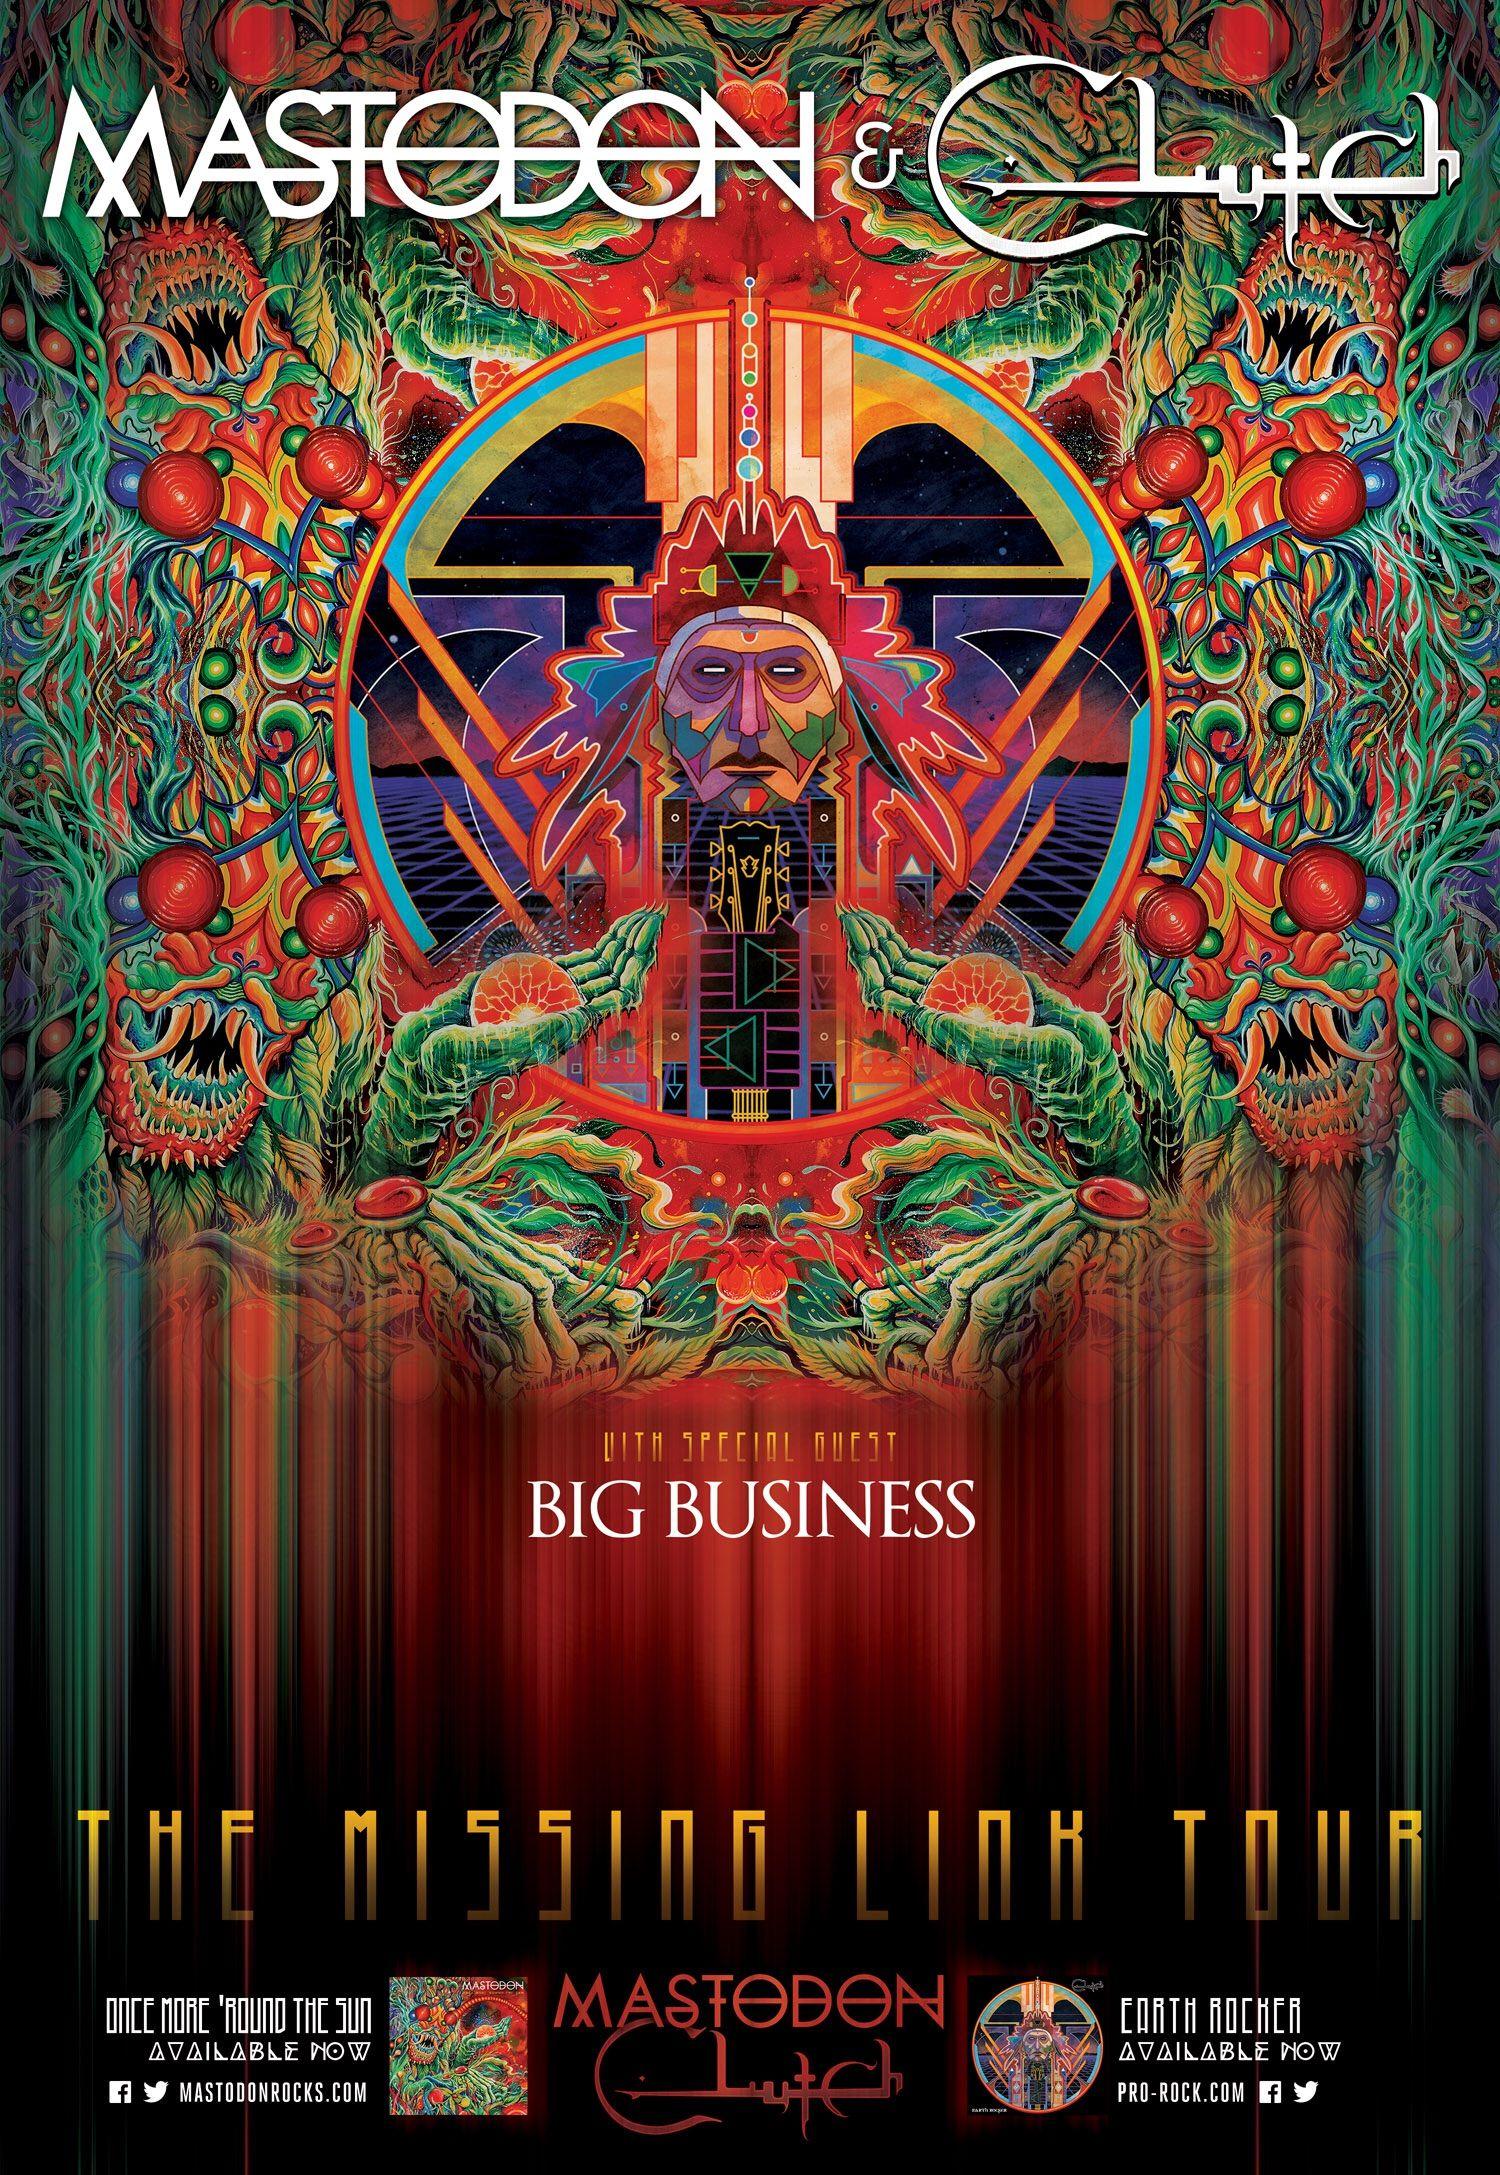 The official website for the band Big Business